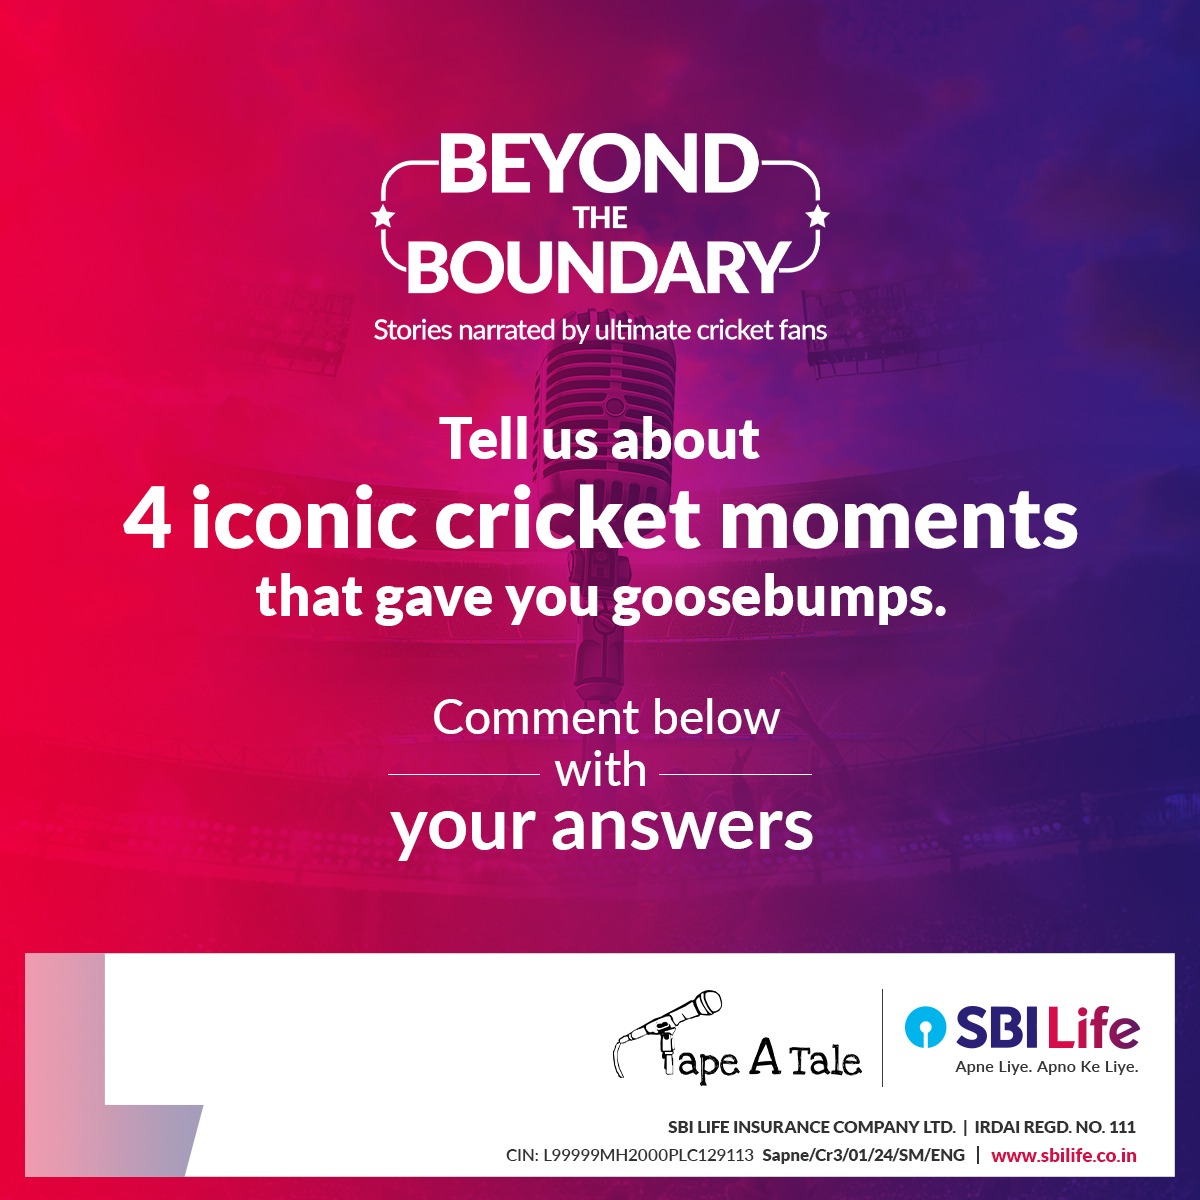 Just 4 days to go! Have you booked your tickets for #BeyondTheBoundary yet?

Visit bit.ly/3uDIYQP to do so today.

@tapeAtale #tat #Storytelling #SpokenWord #CricketTales #CricketStories #SportsNarratives #CricketCommunity  #SBILife #ApneLiyeApnoKeLiye